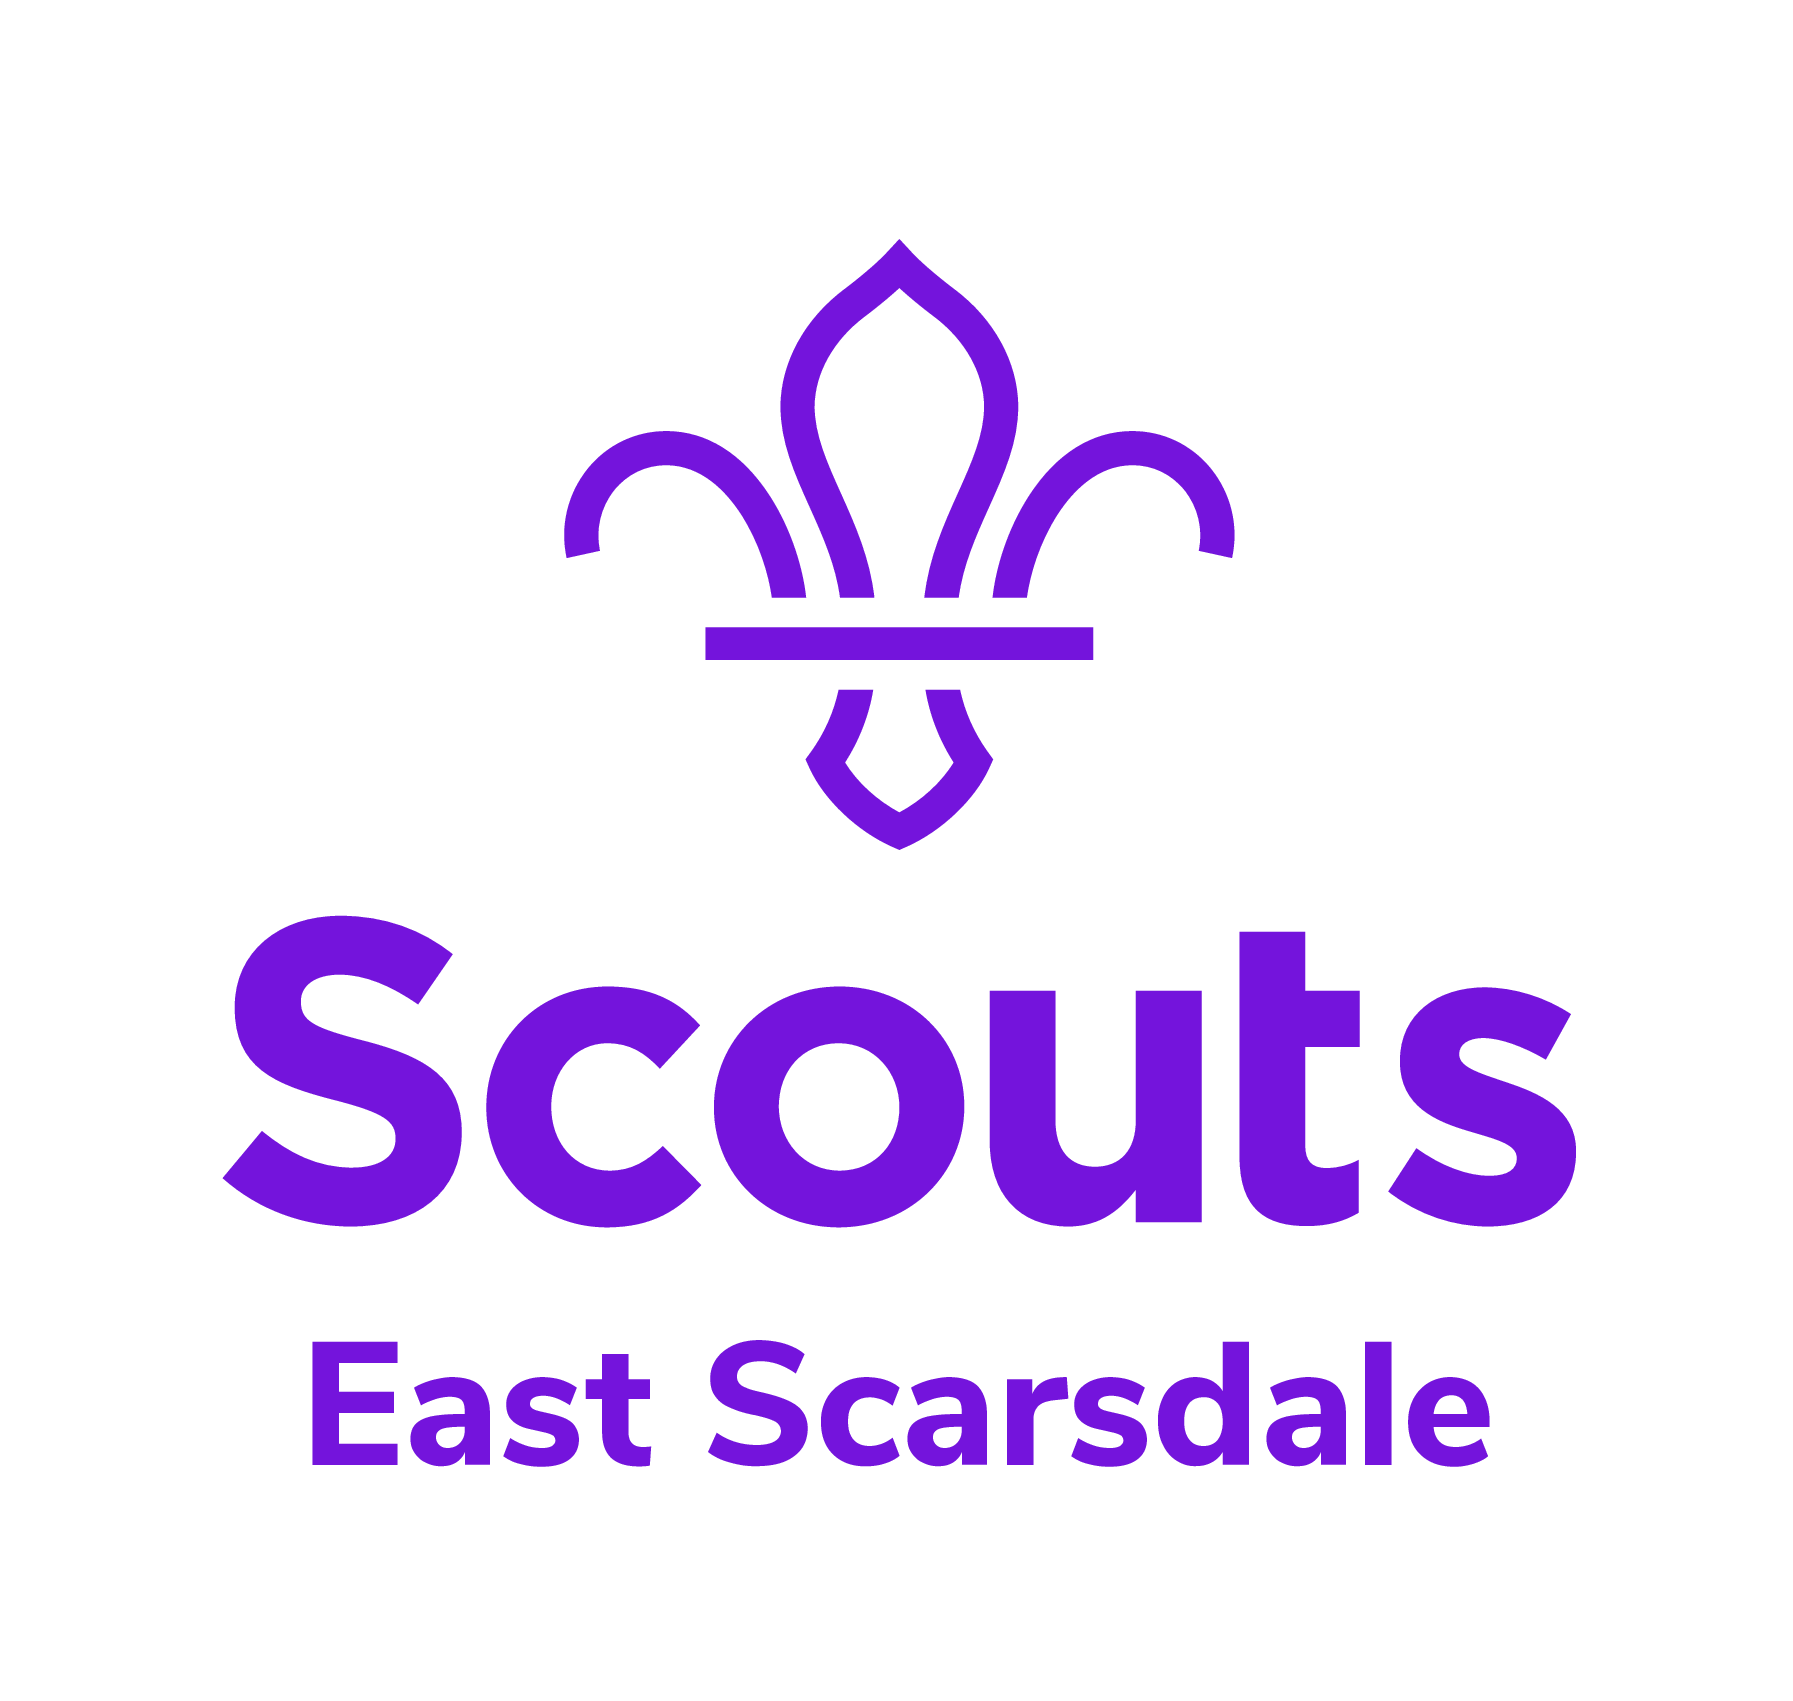 Cub Section Leader (2nd Shirebrook)